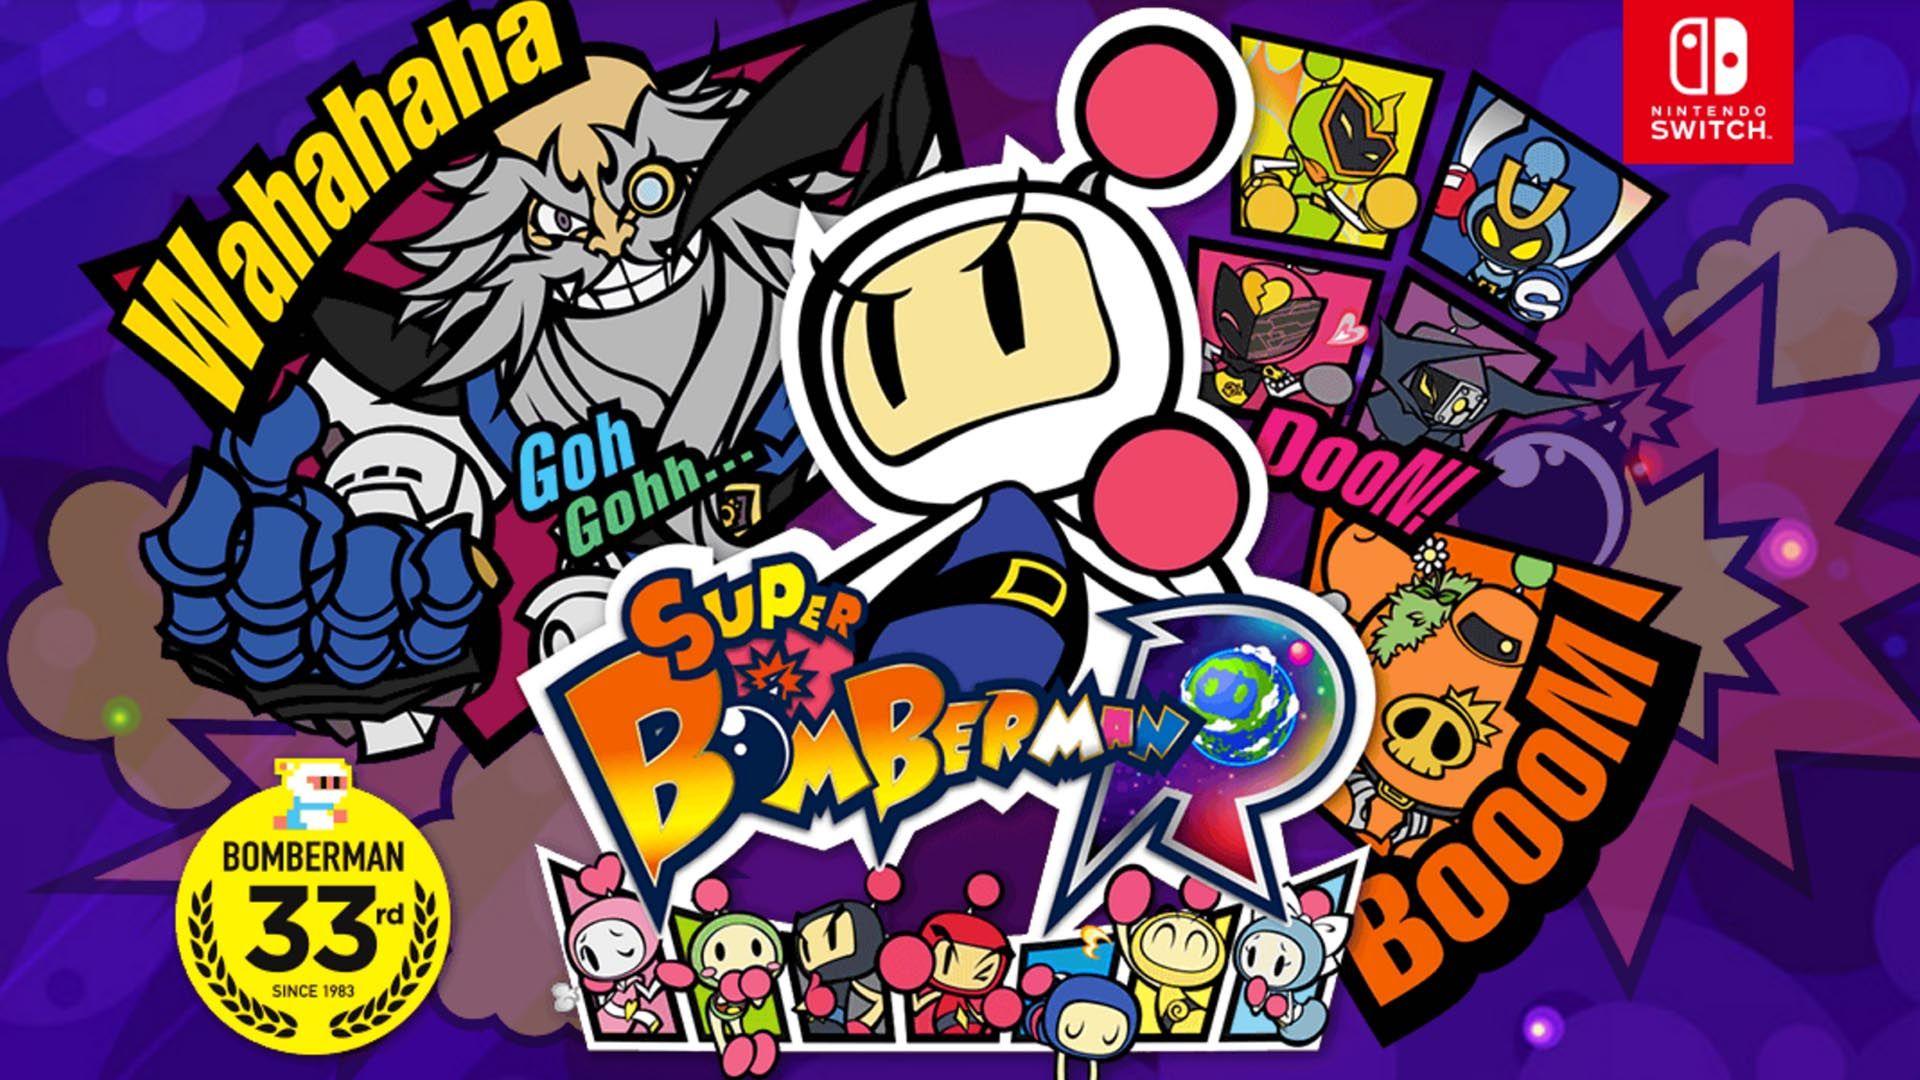 Super Bomberman R to be priced at $49.99